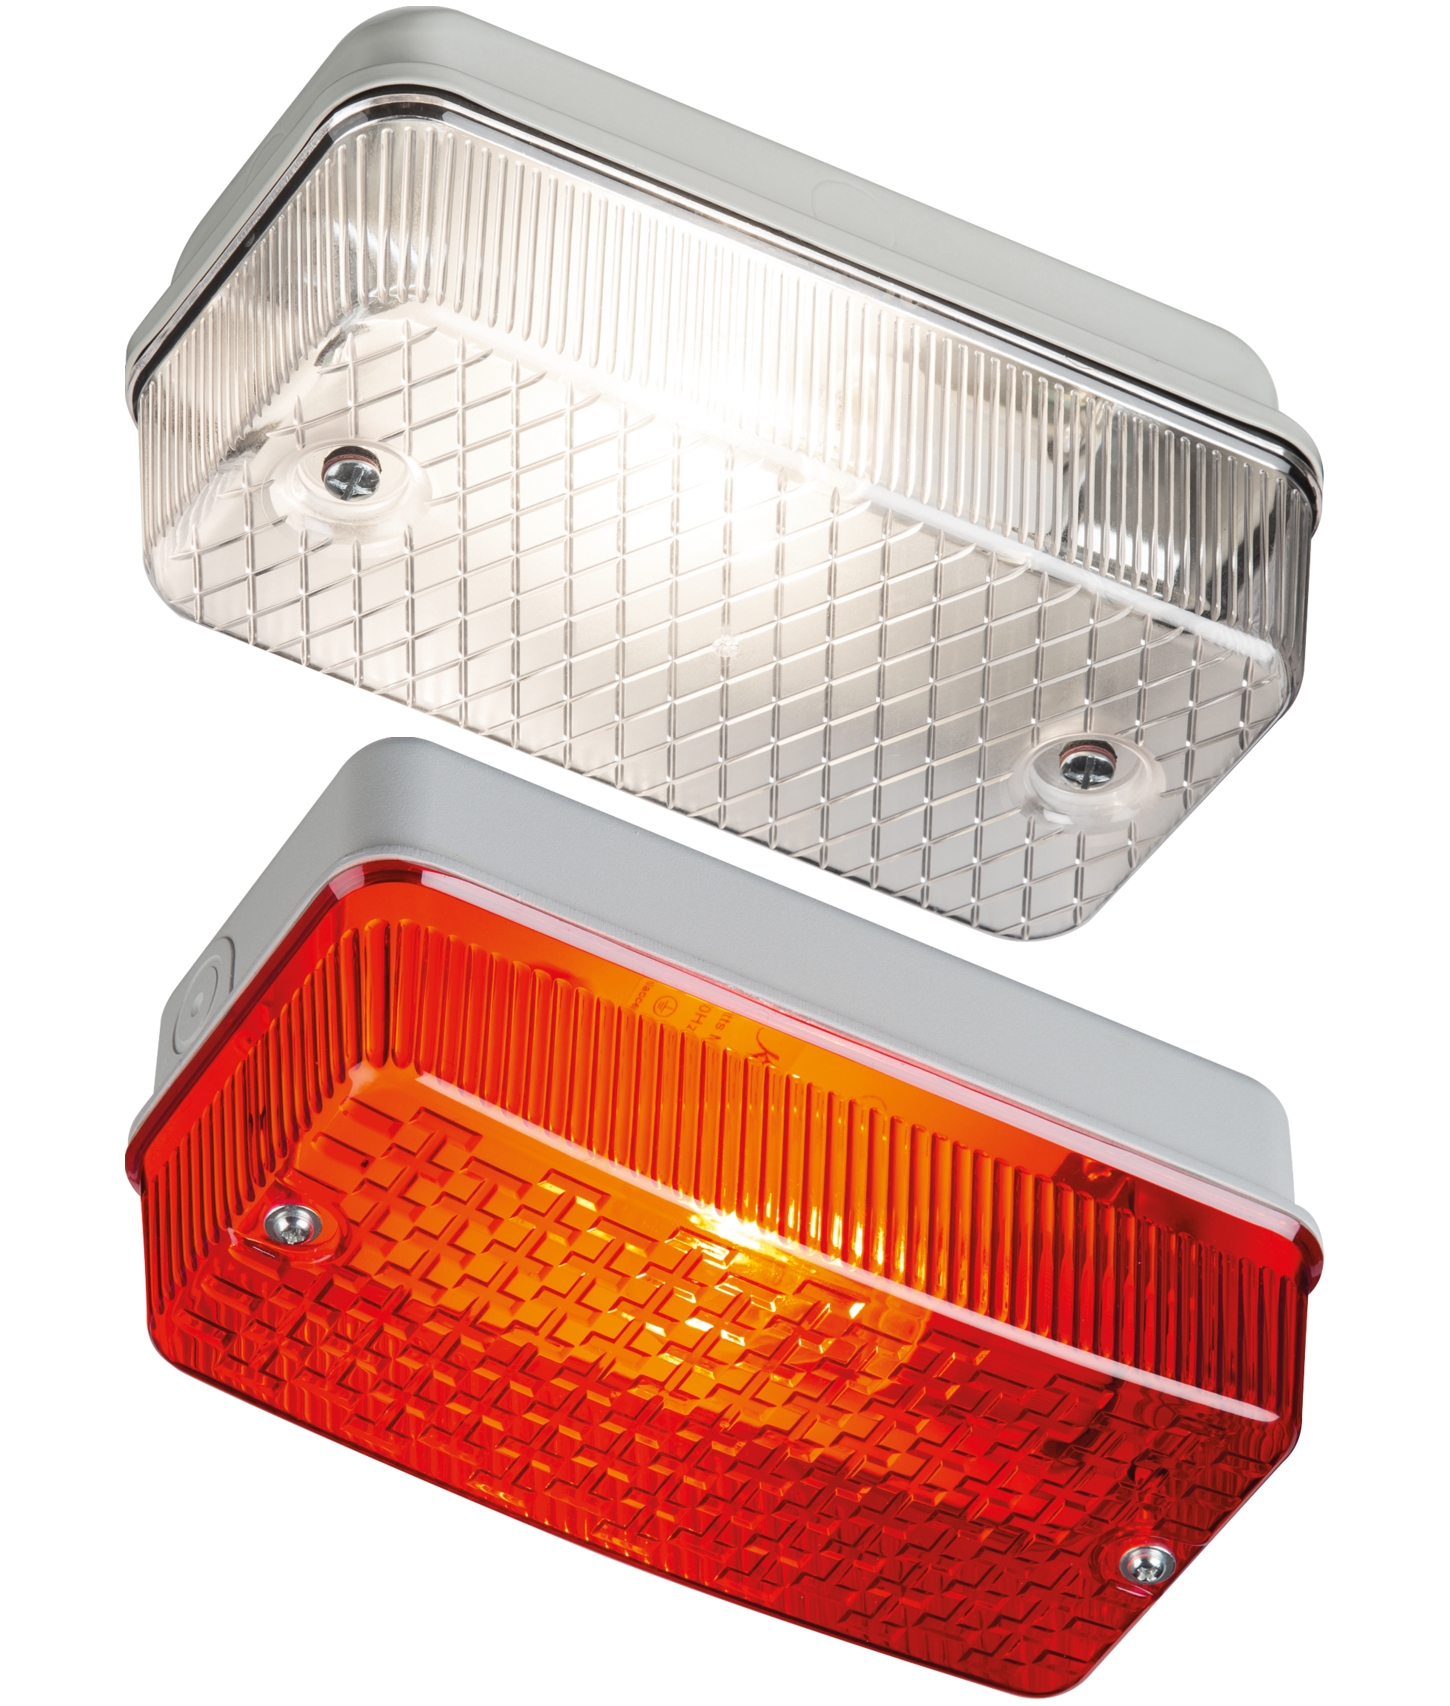 100W IP65 ES E27 Aluminium Base Bulkhead in Clear or Red for Inside & Outside 